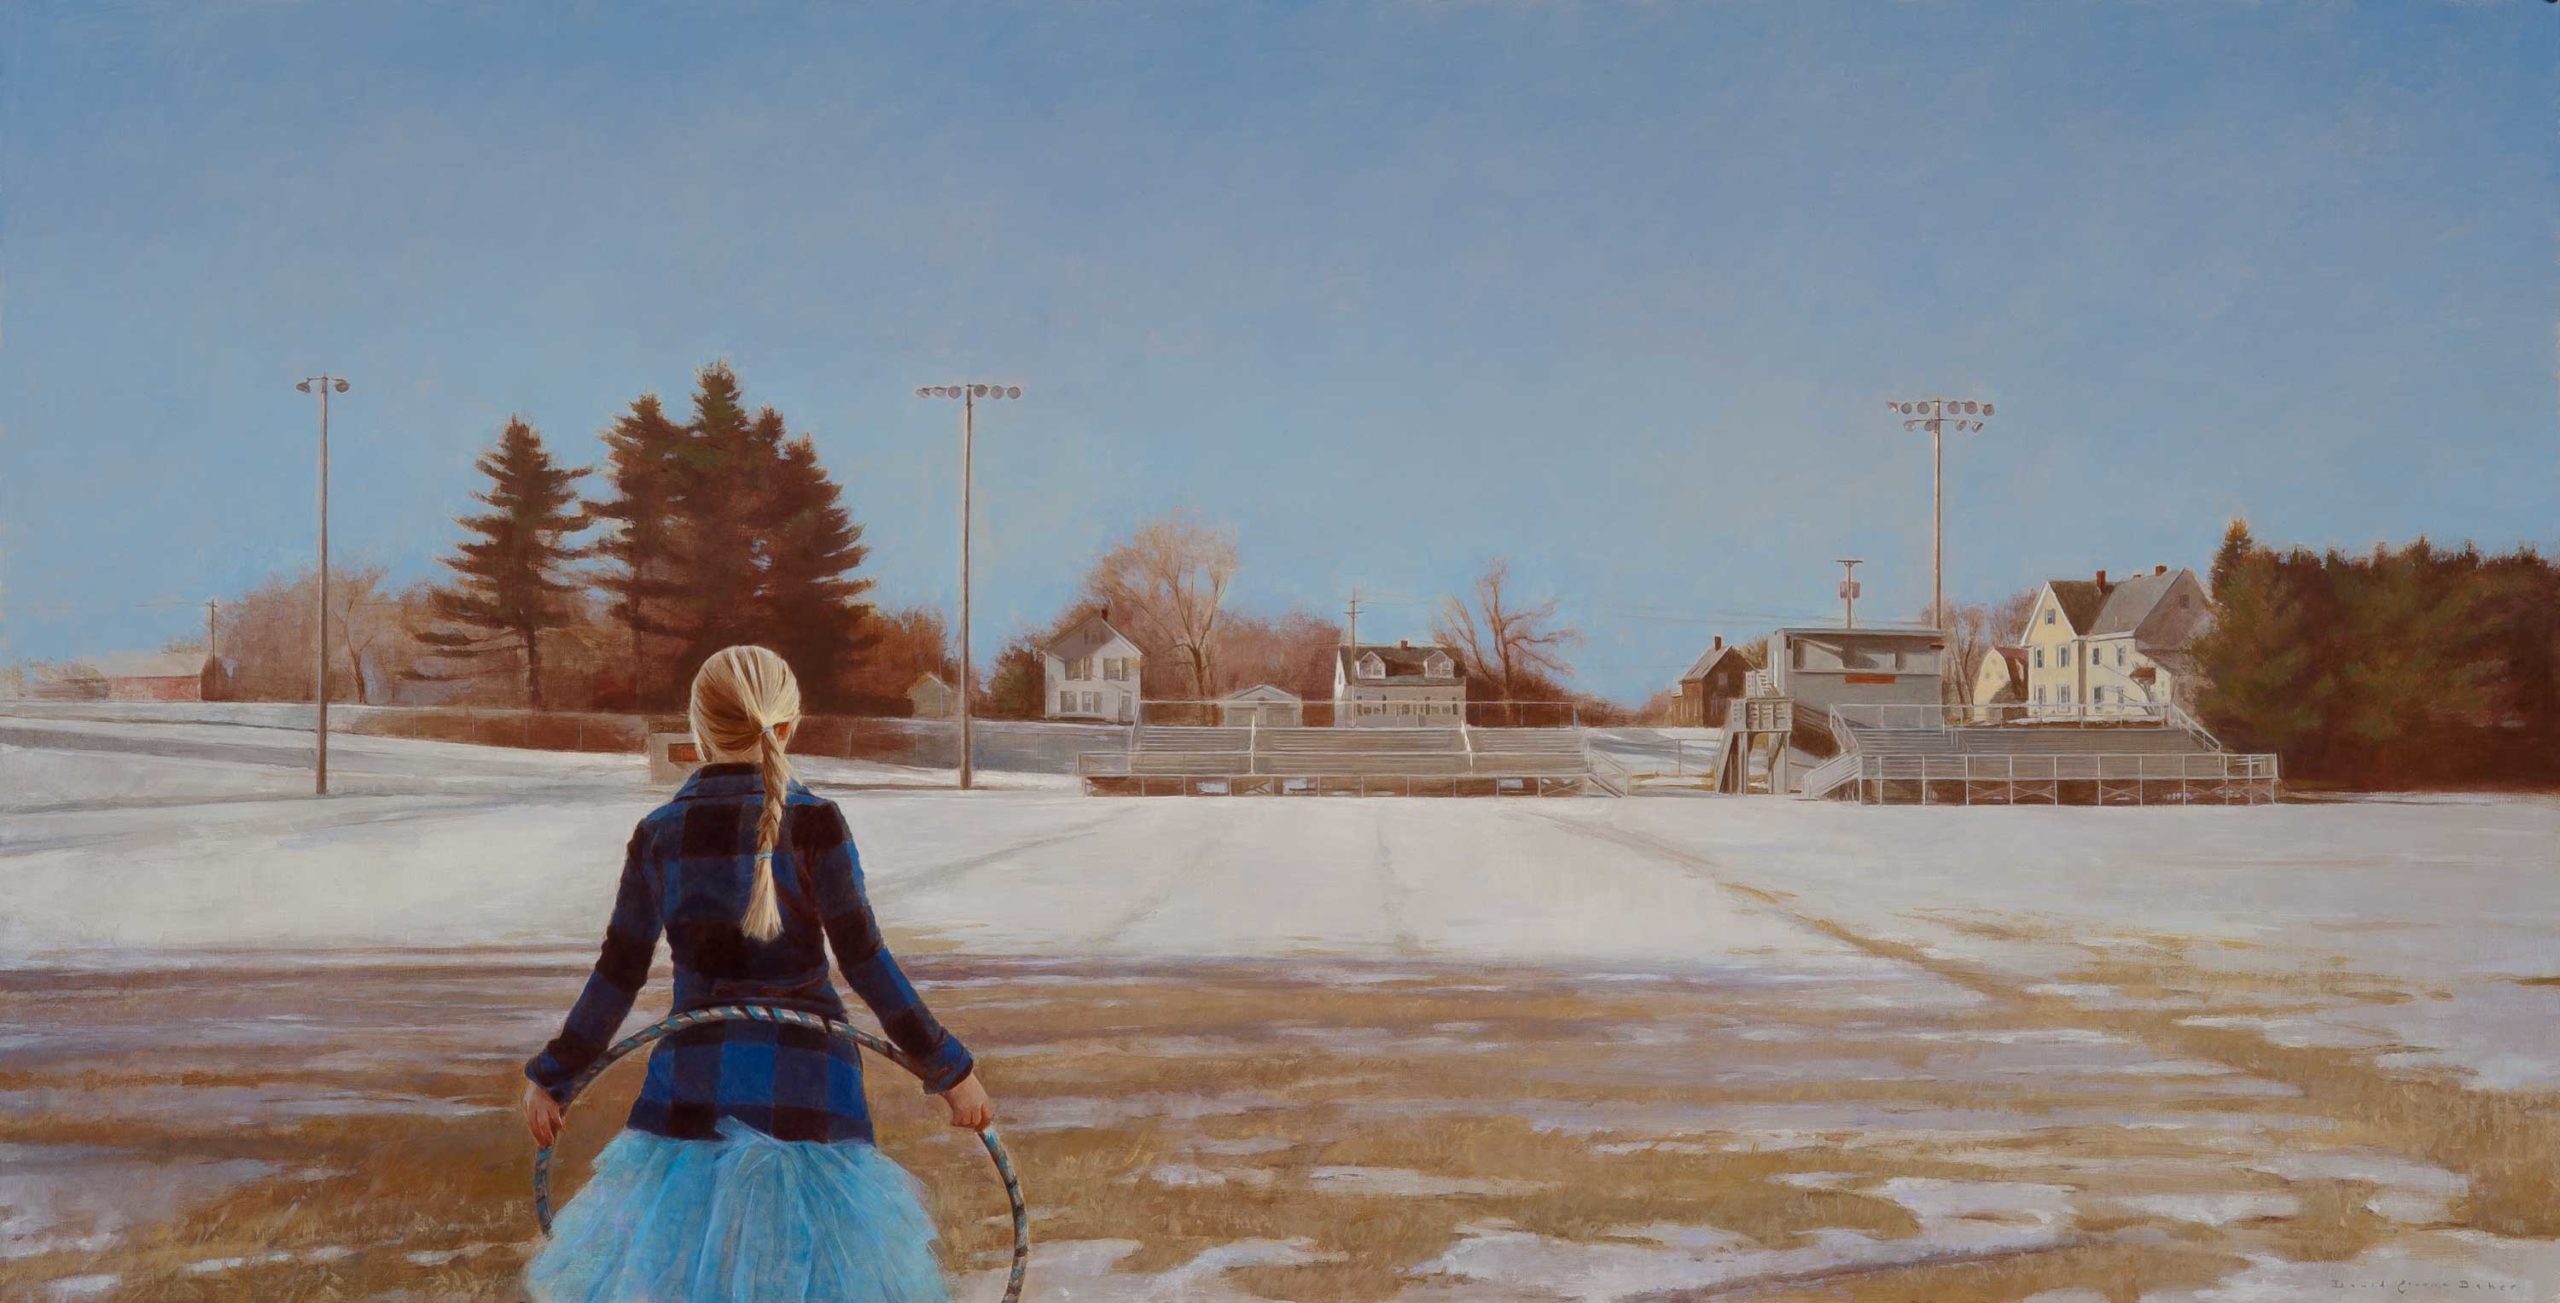 Narrative realist painting - David Baker, "Homefield," 24 x 47 inches, Oil on linen mounted on panel